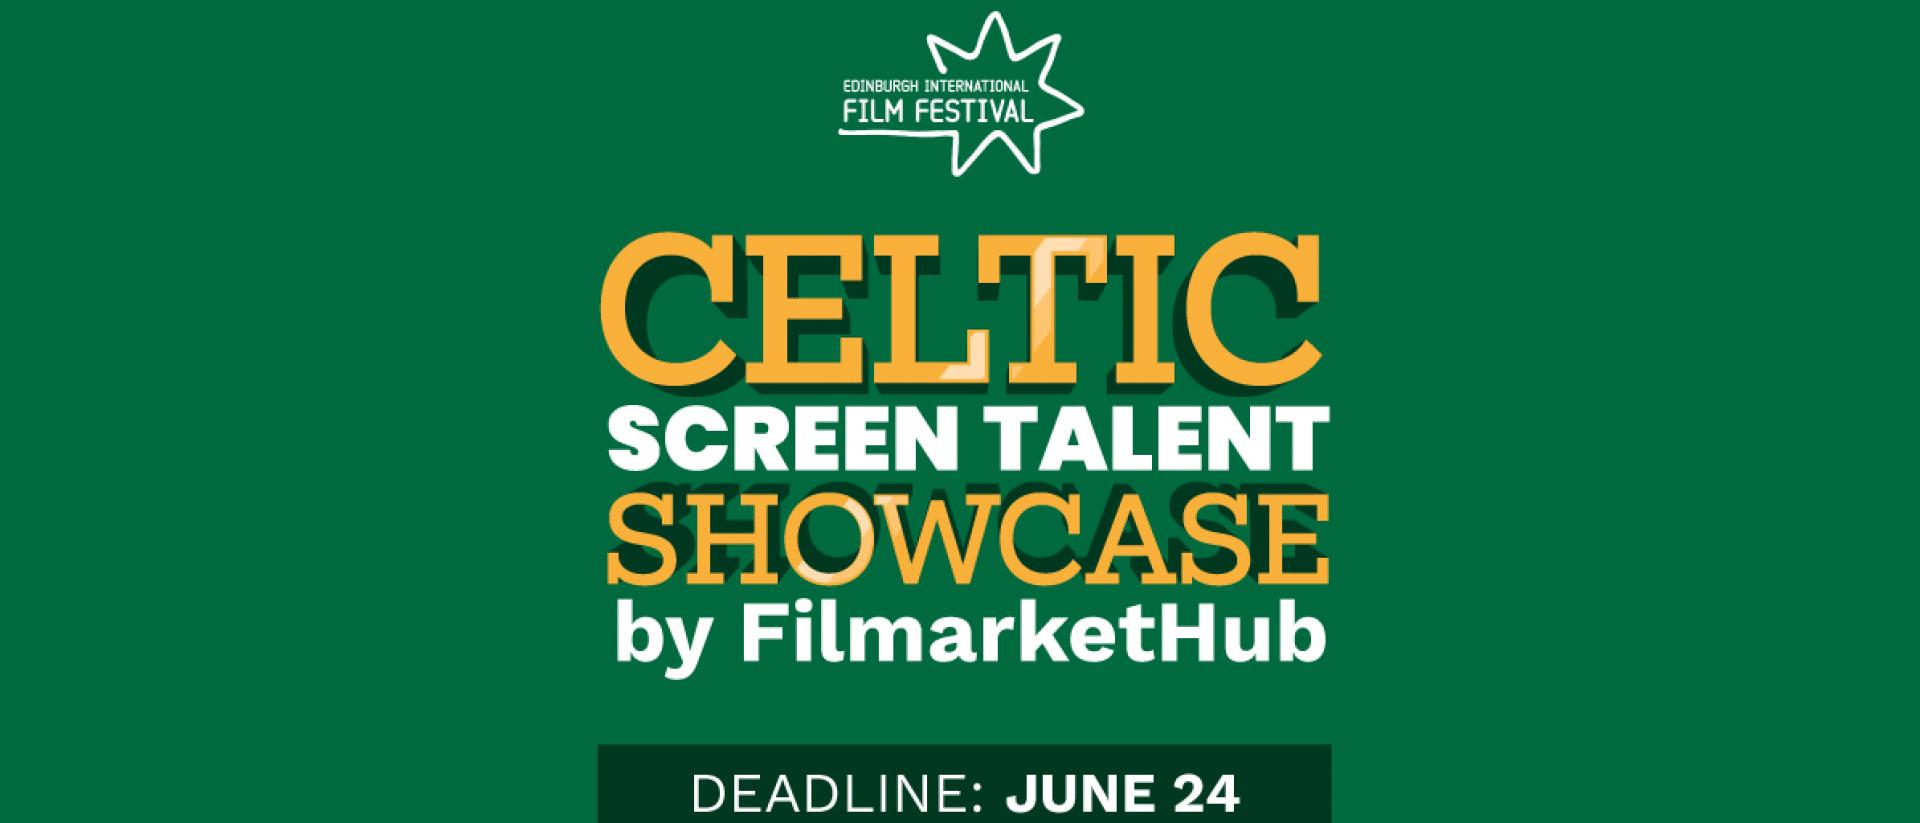 green graphic with text that says Celtic Screen Talent Showcase by Filmarkethub